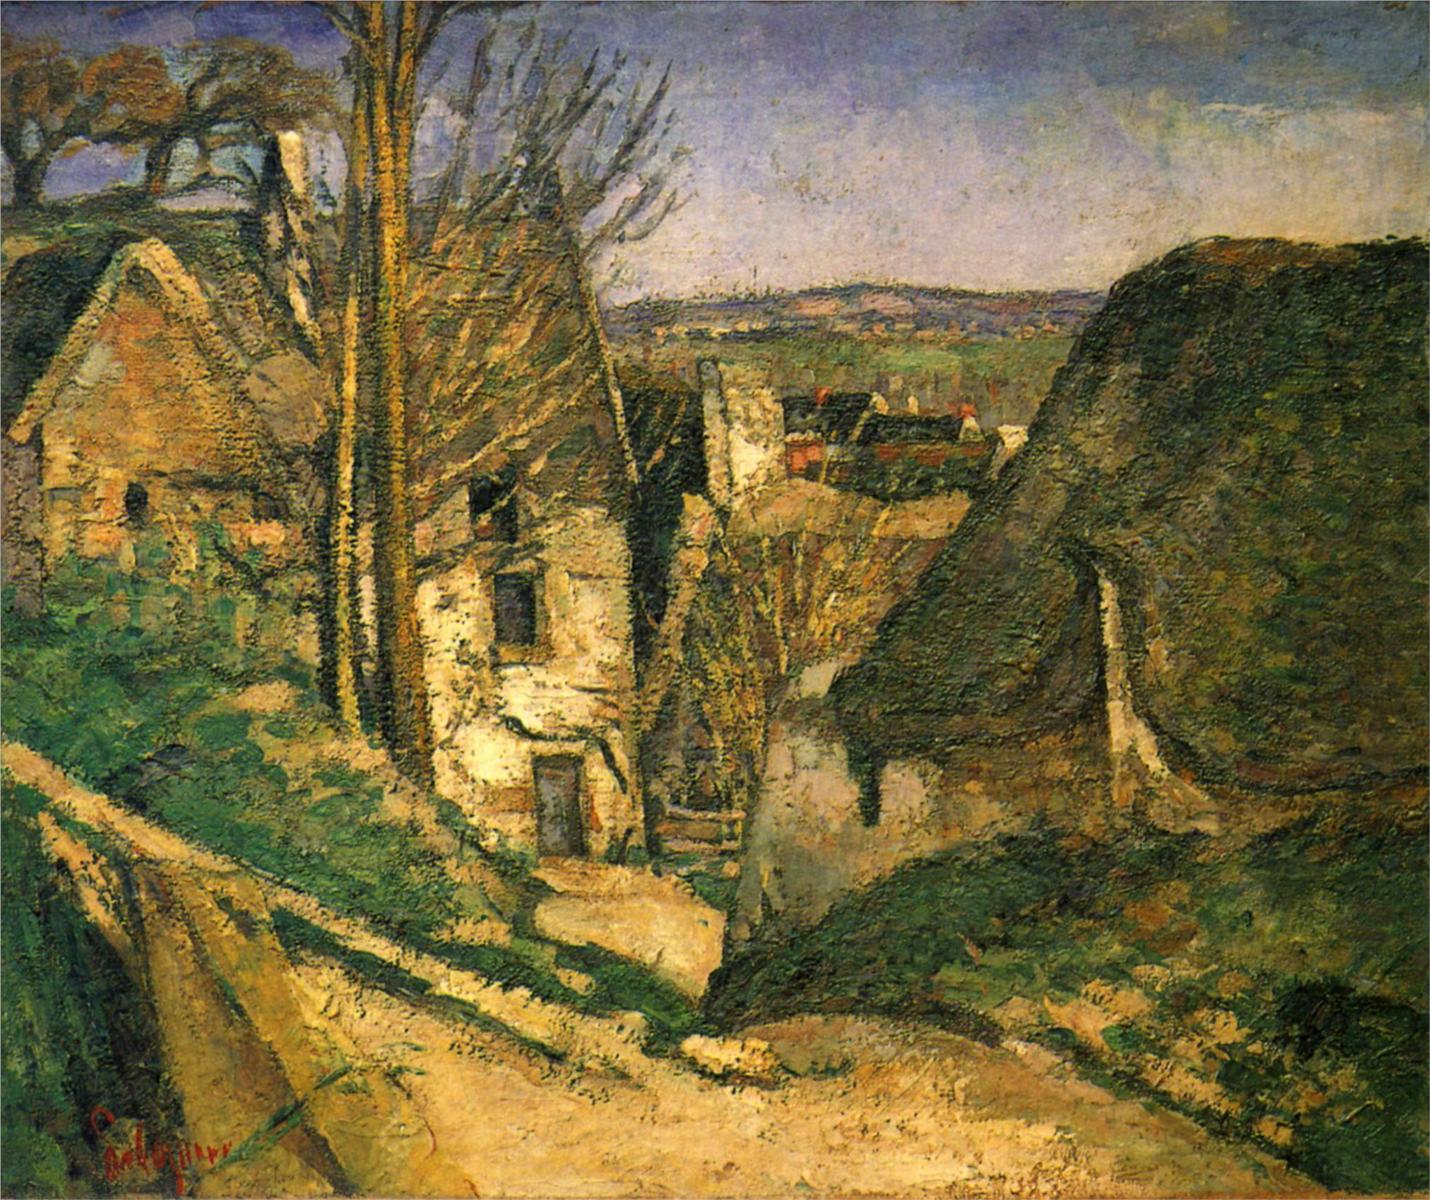 The House of the Hanged Man - Paul Cezanne Painting